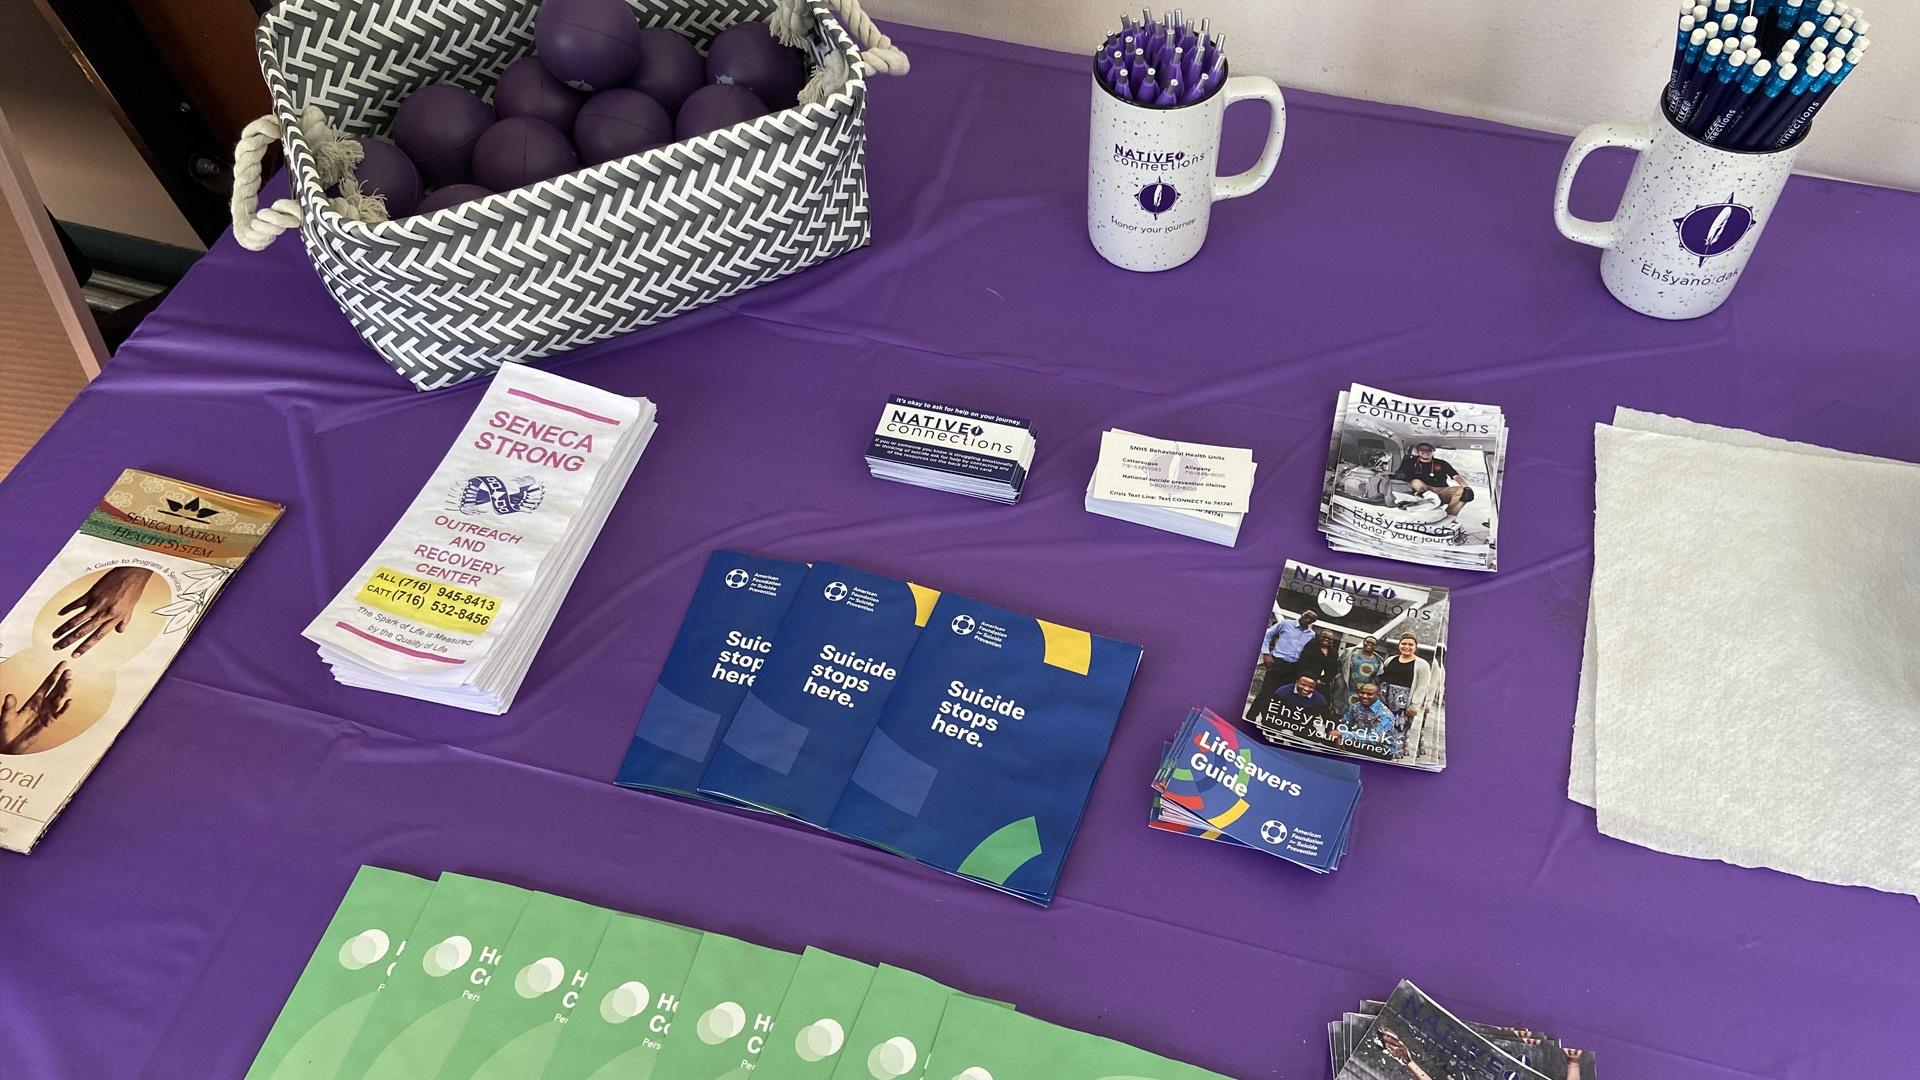 pamphlets and information about suicide prevention on a table at the Seneca Clubhouse in Cattaraugus